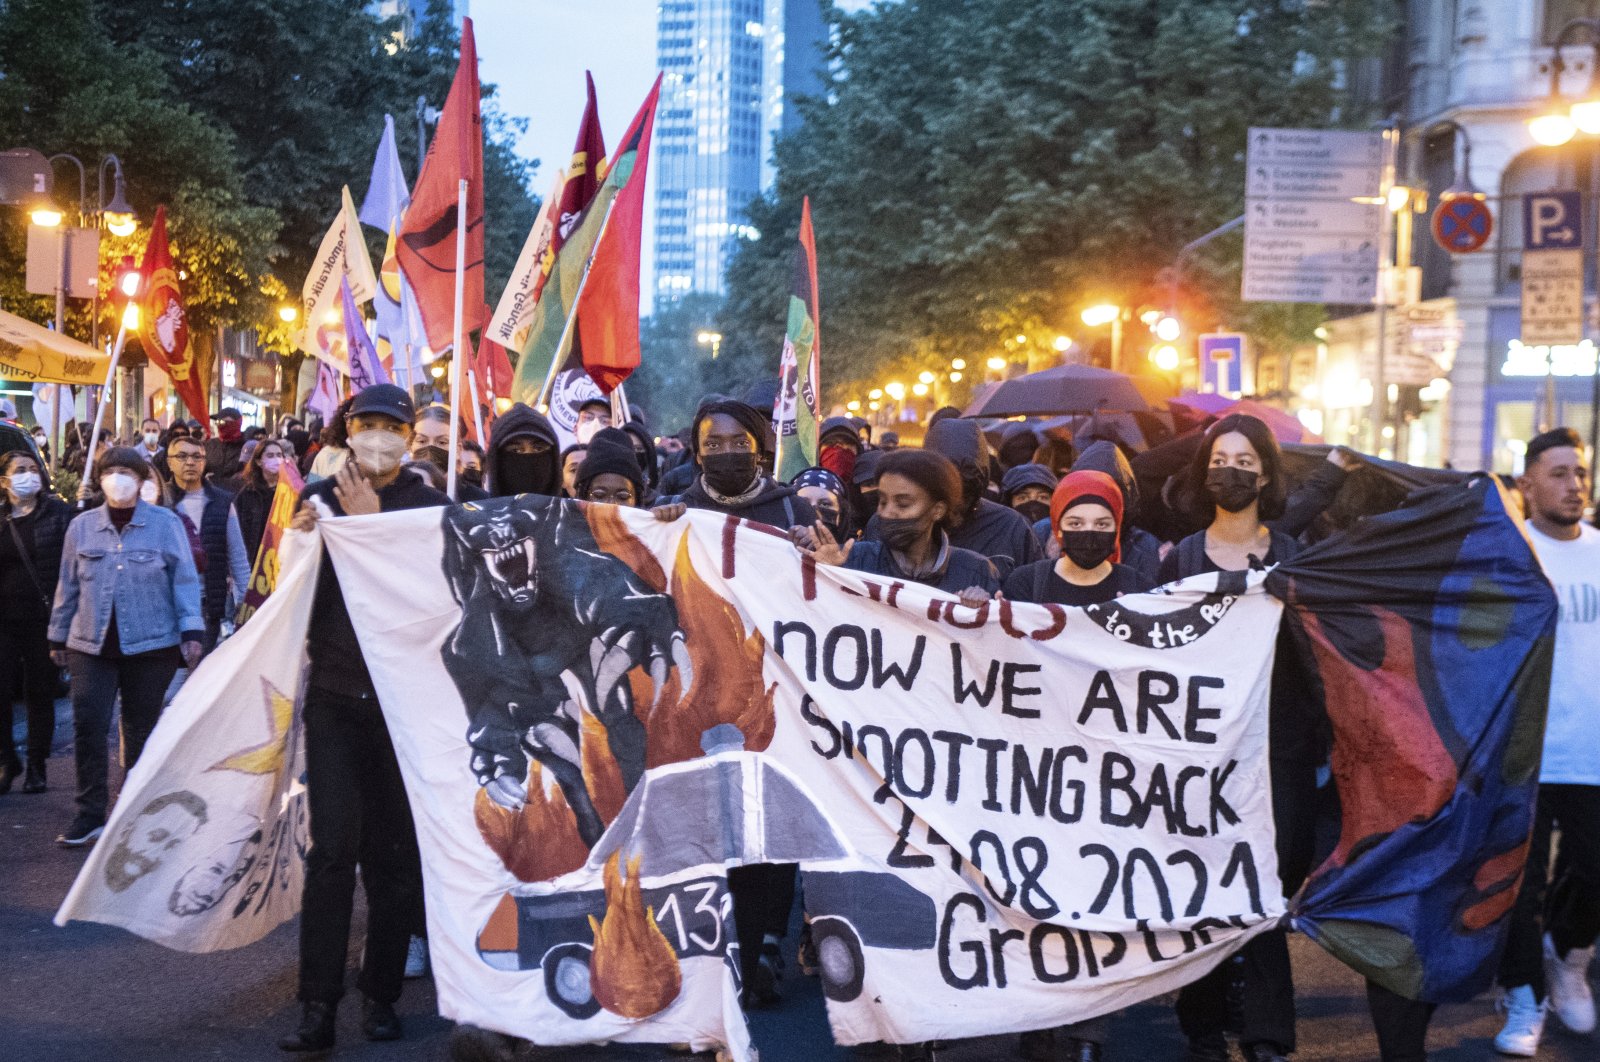 Several hundred people from the left-wing spectrum protest against police violence and racism during a march through the city center in Frankfurt/Main, Germany, May 3, 2022. (AP Photo)